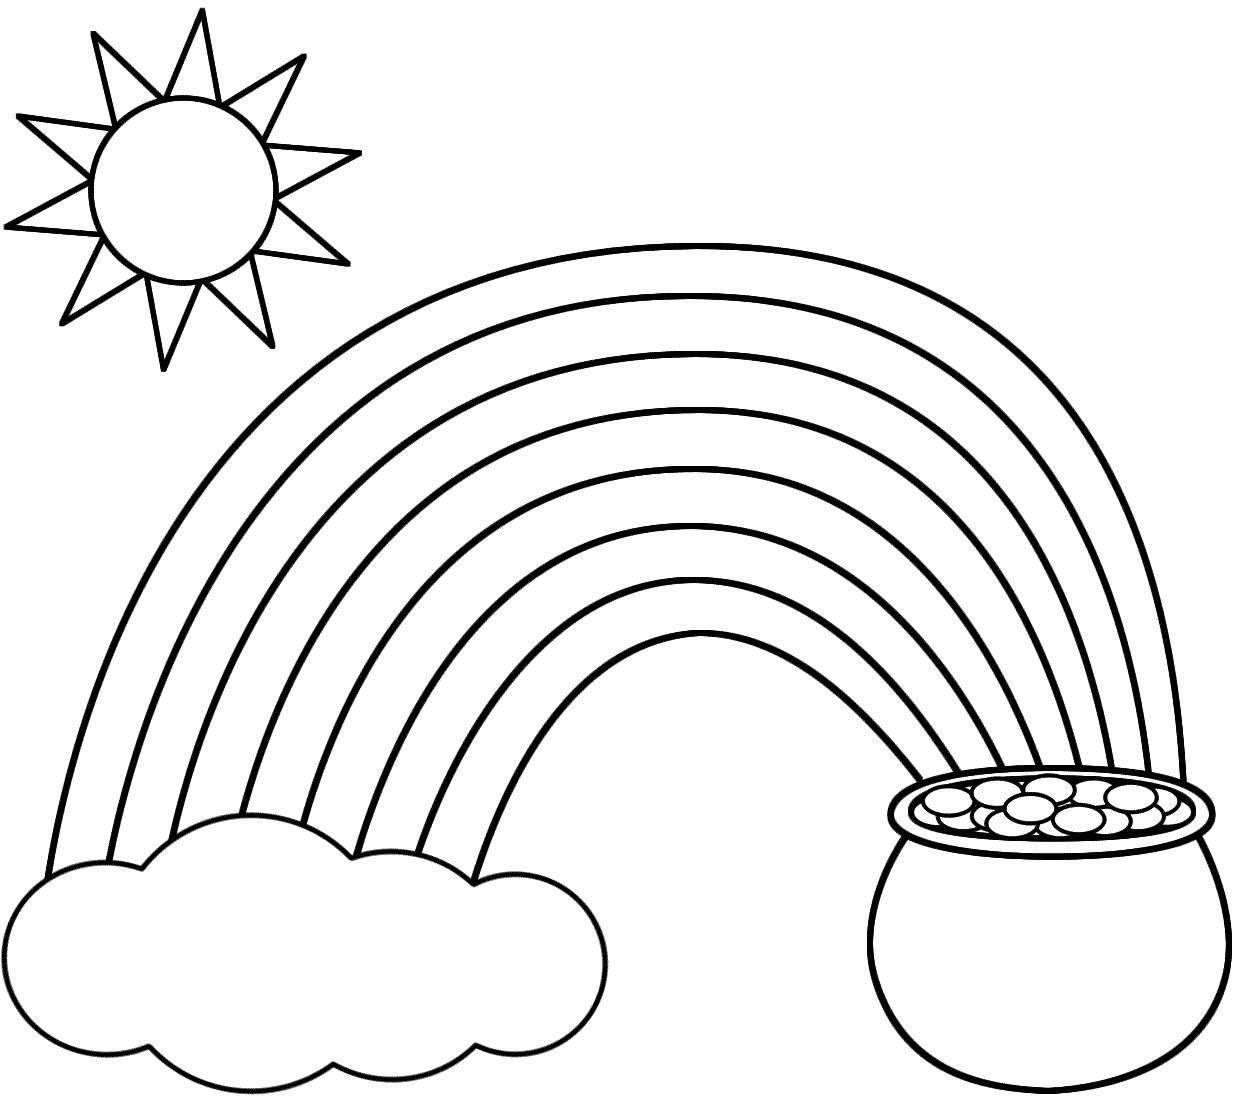 Rainbow Coloring Pages For Adults
 rainbow coloring pages for kids printable